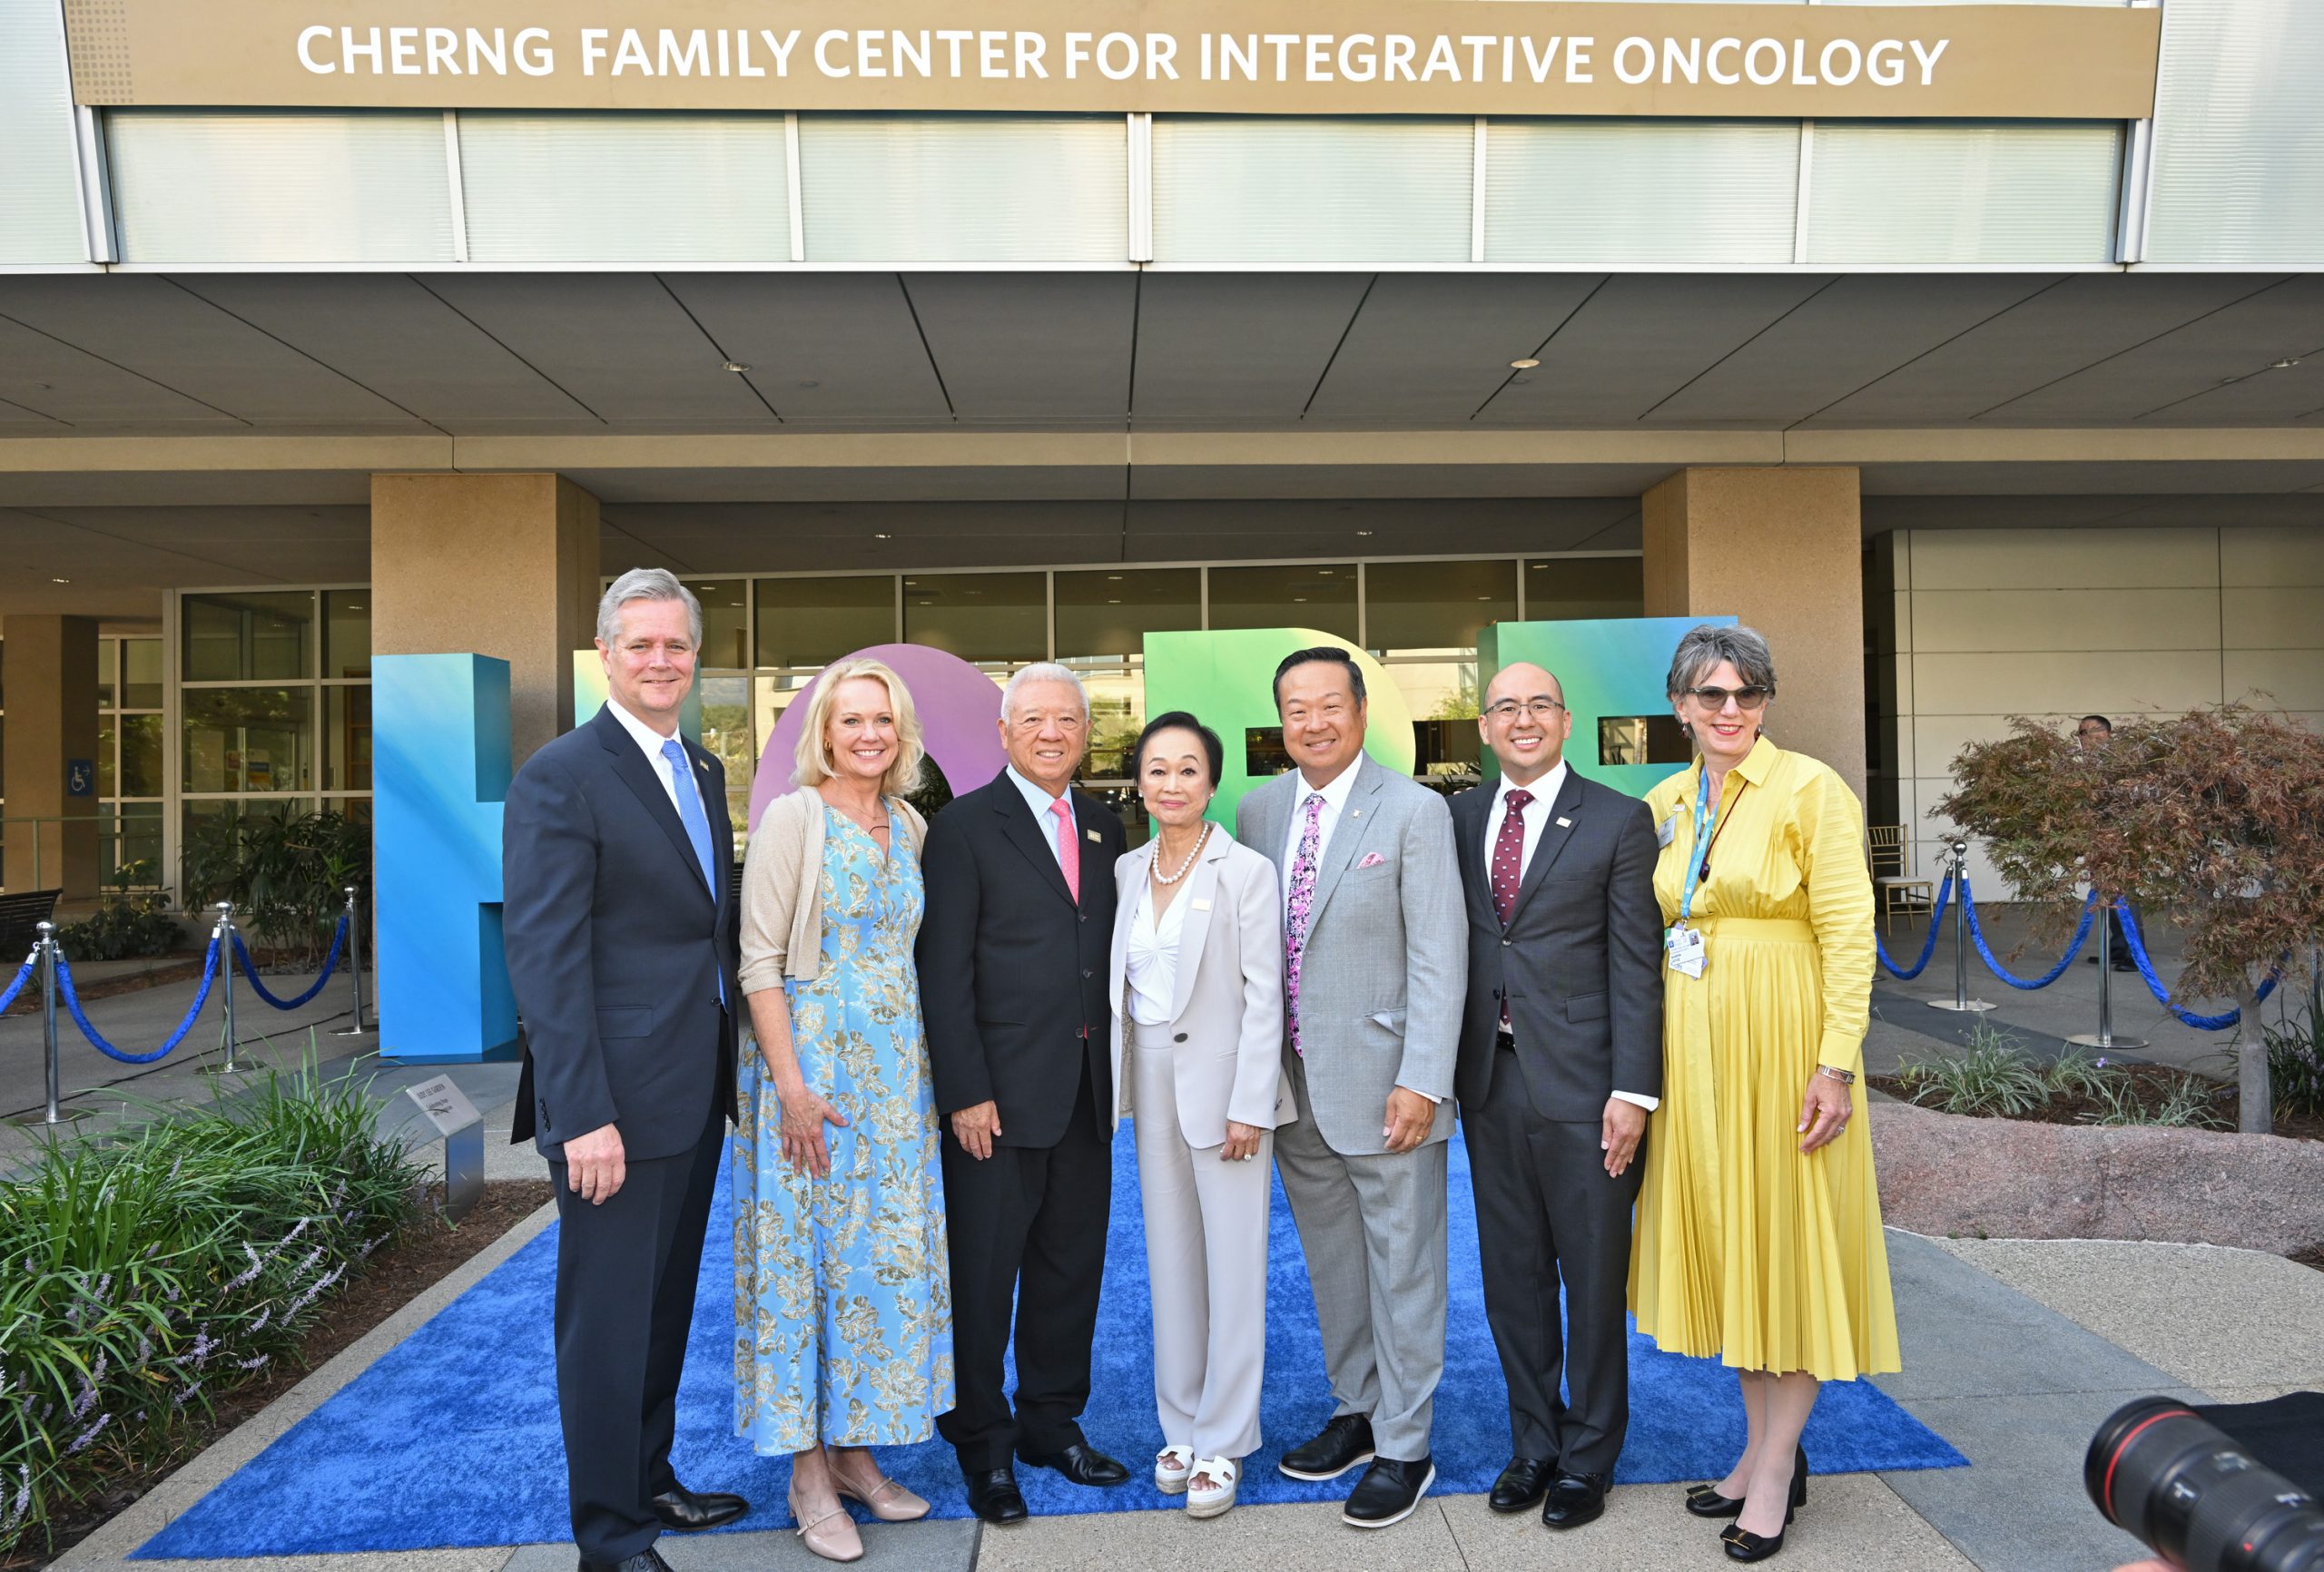 City of Hope Receives $100 Million Gift to Create the Cherng Family Center for Integrative Oncology